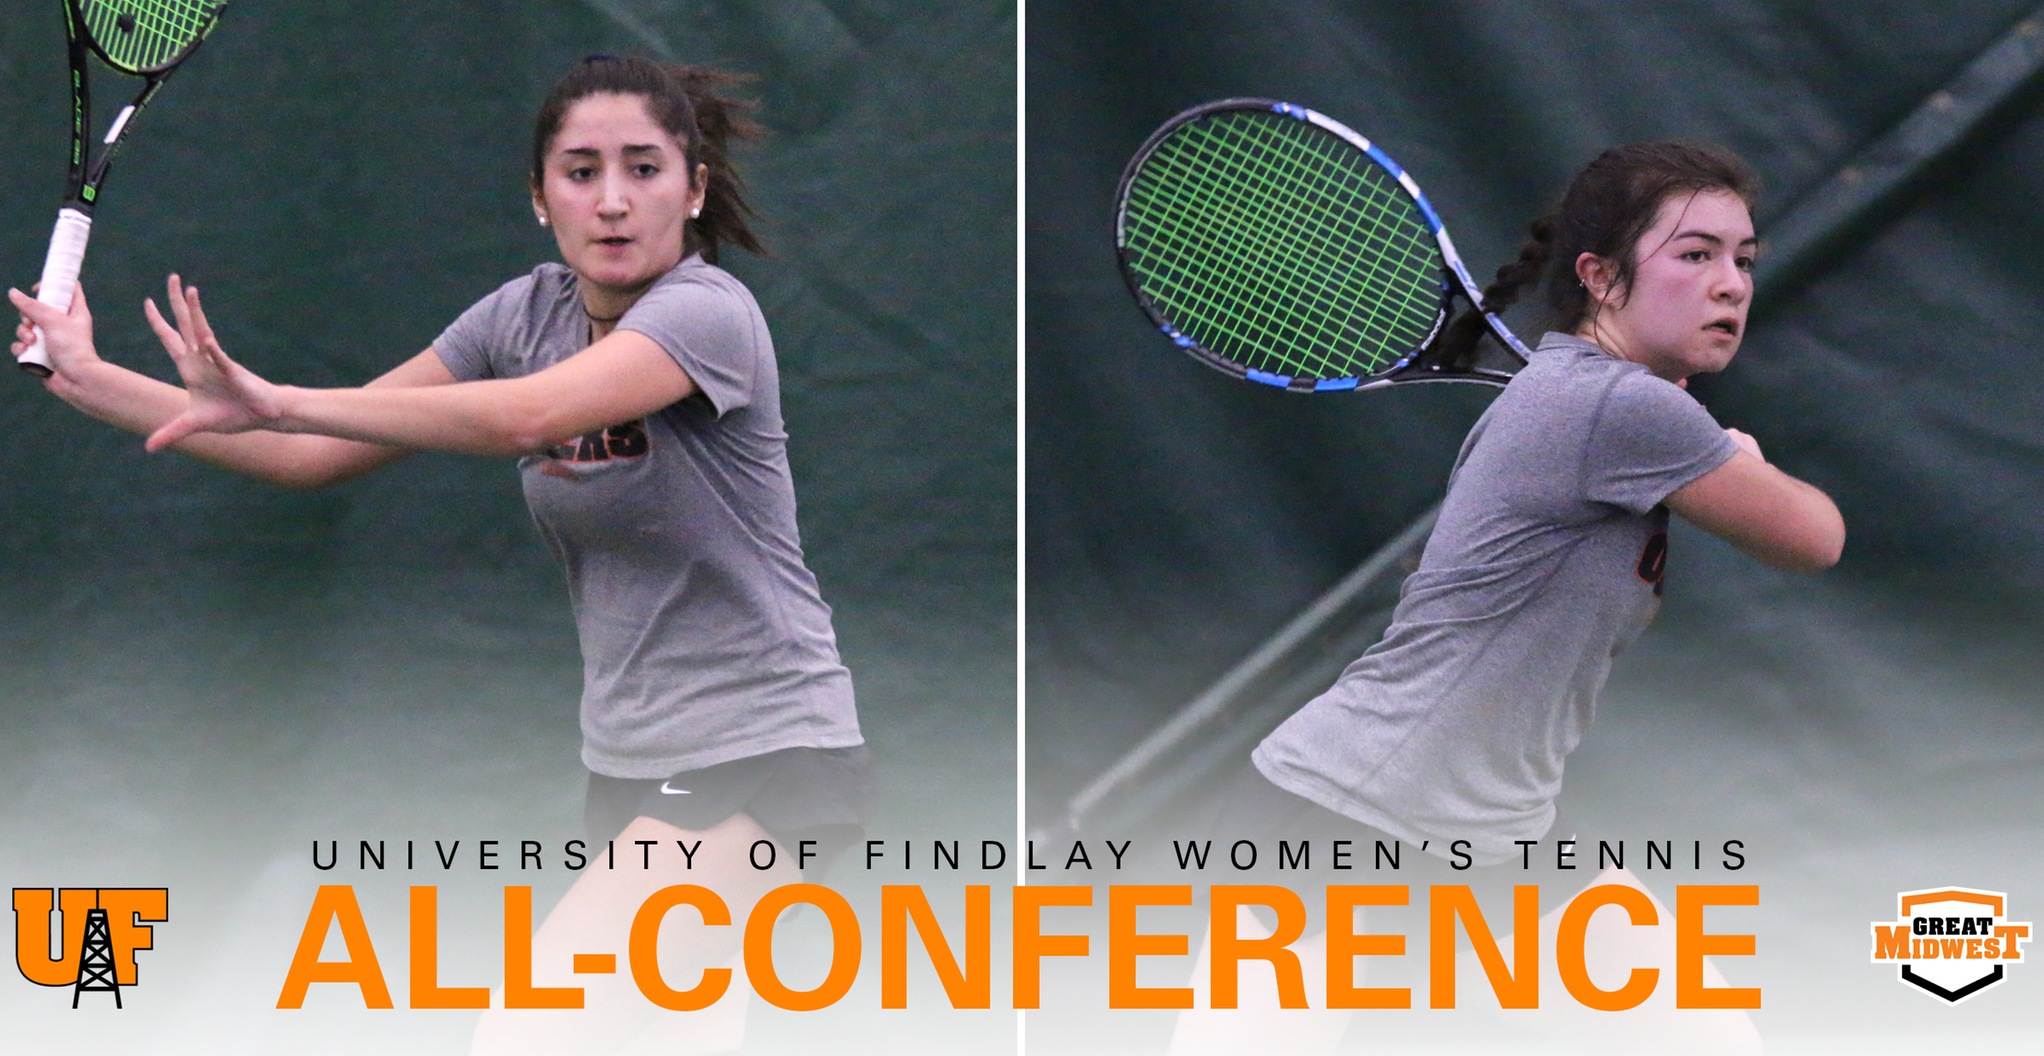 Sweet | Kirov Earn All-Conference Honors